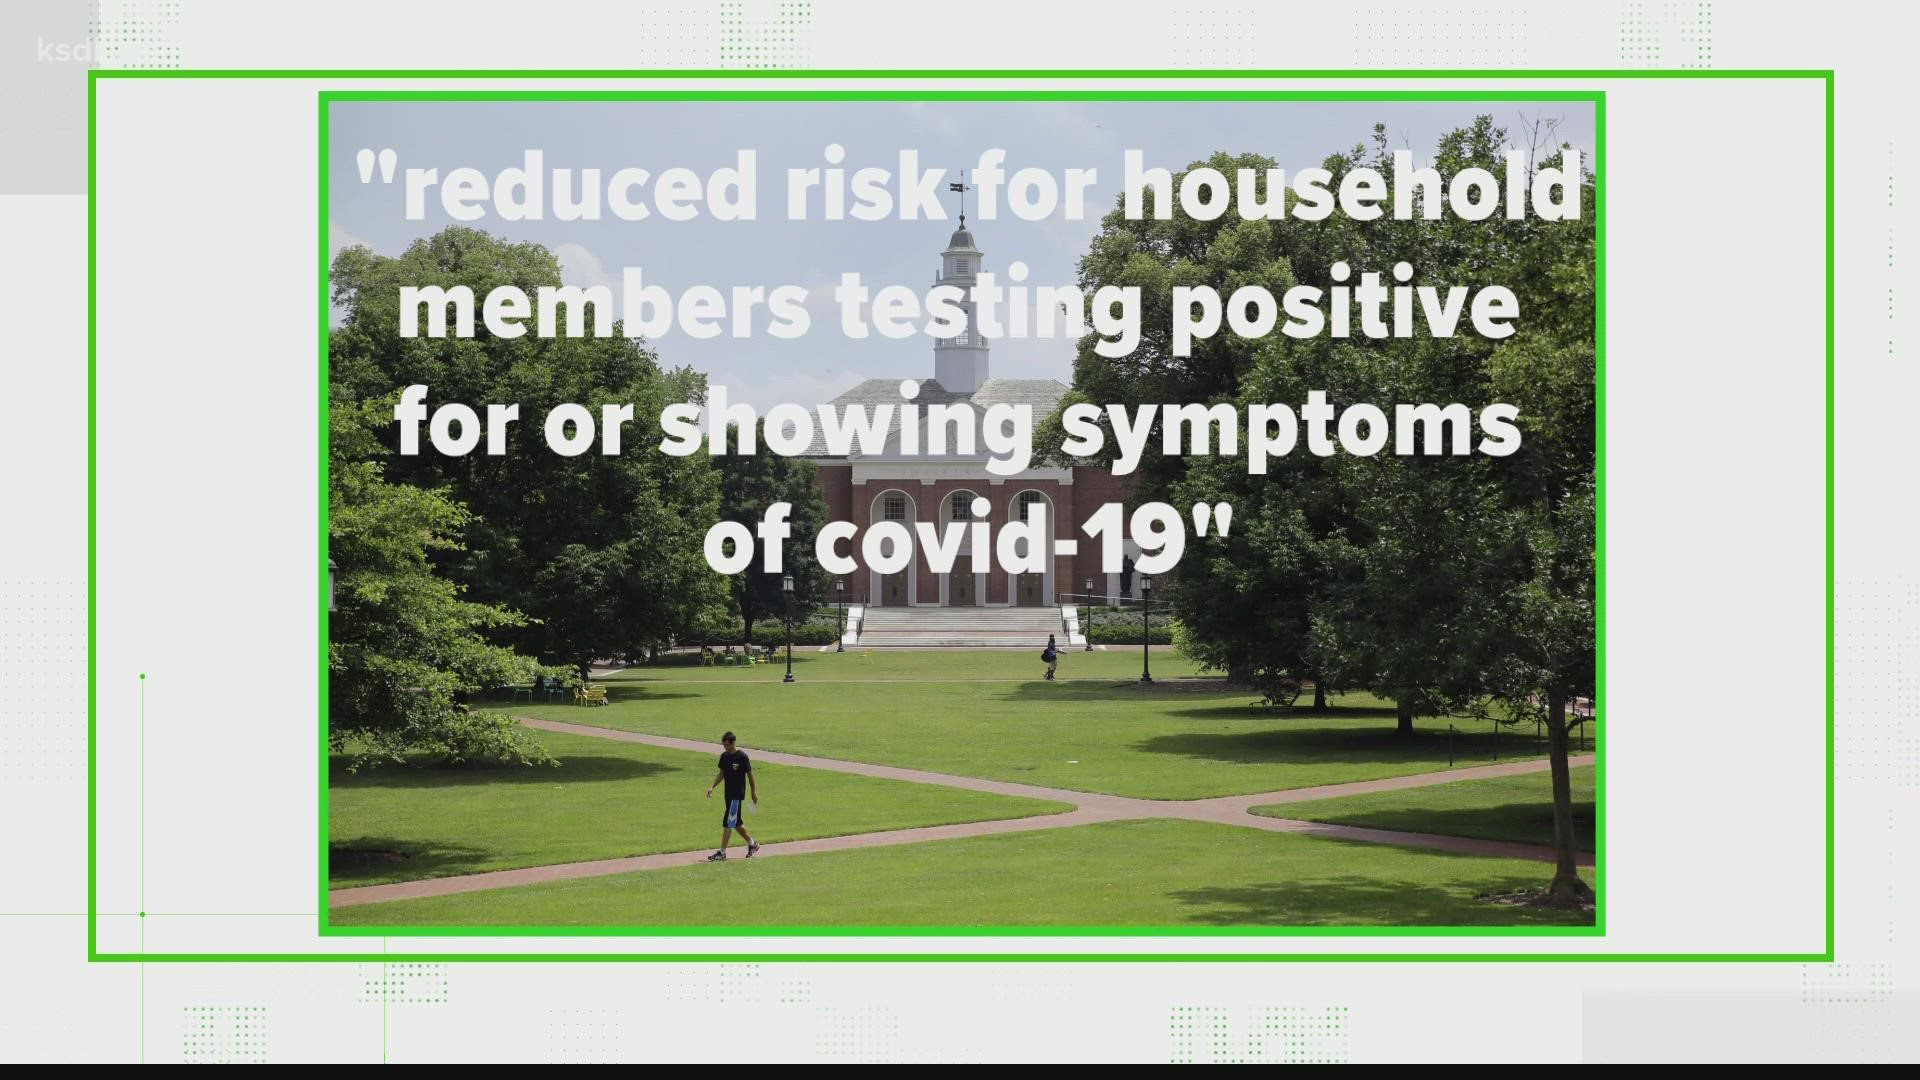 When the Verify team asked for clarification, their reply included research that said children wearing masks help prevent the spread of COVID-19